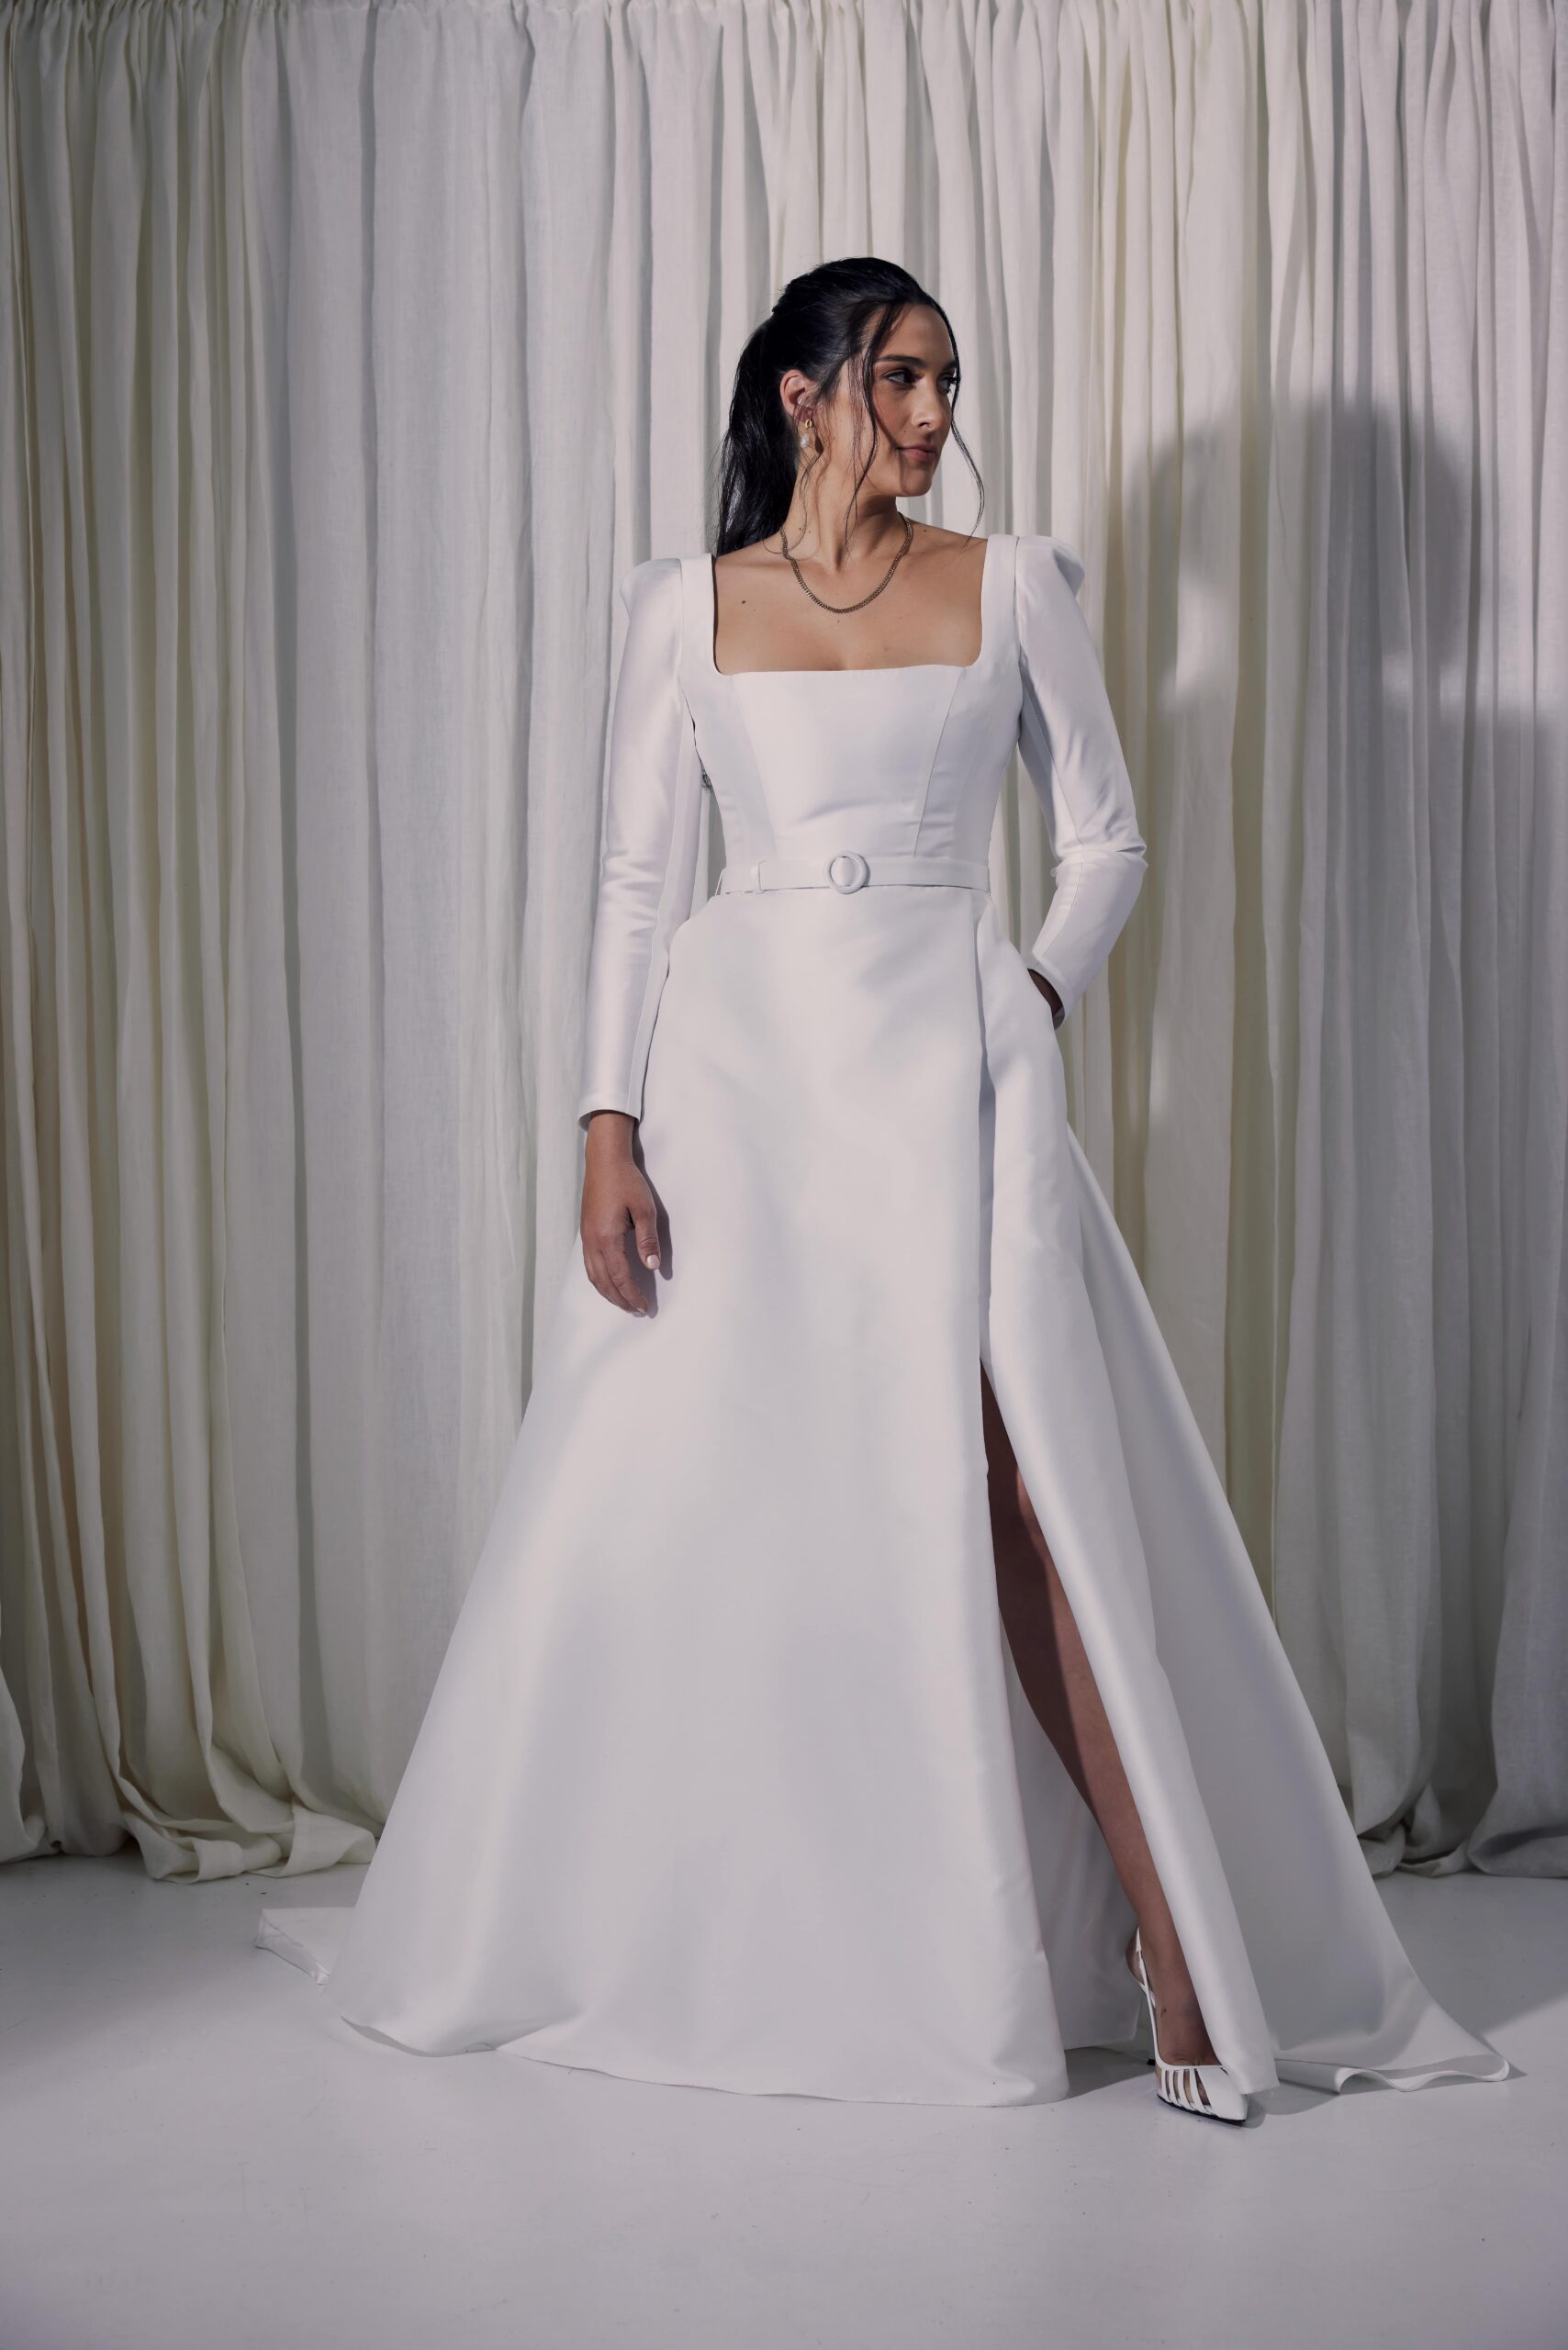 The Gianna gown - a contemporary ballgown cut from a silk mix mikado with a square neckline, tailored sleeves, a covered belt at the waist and a wrap split.